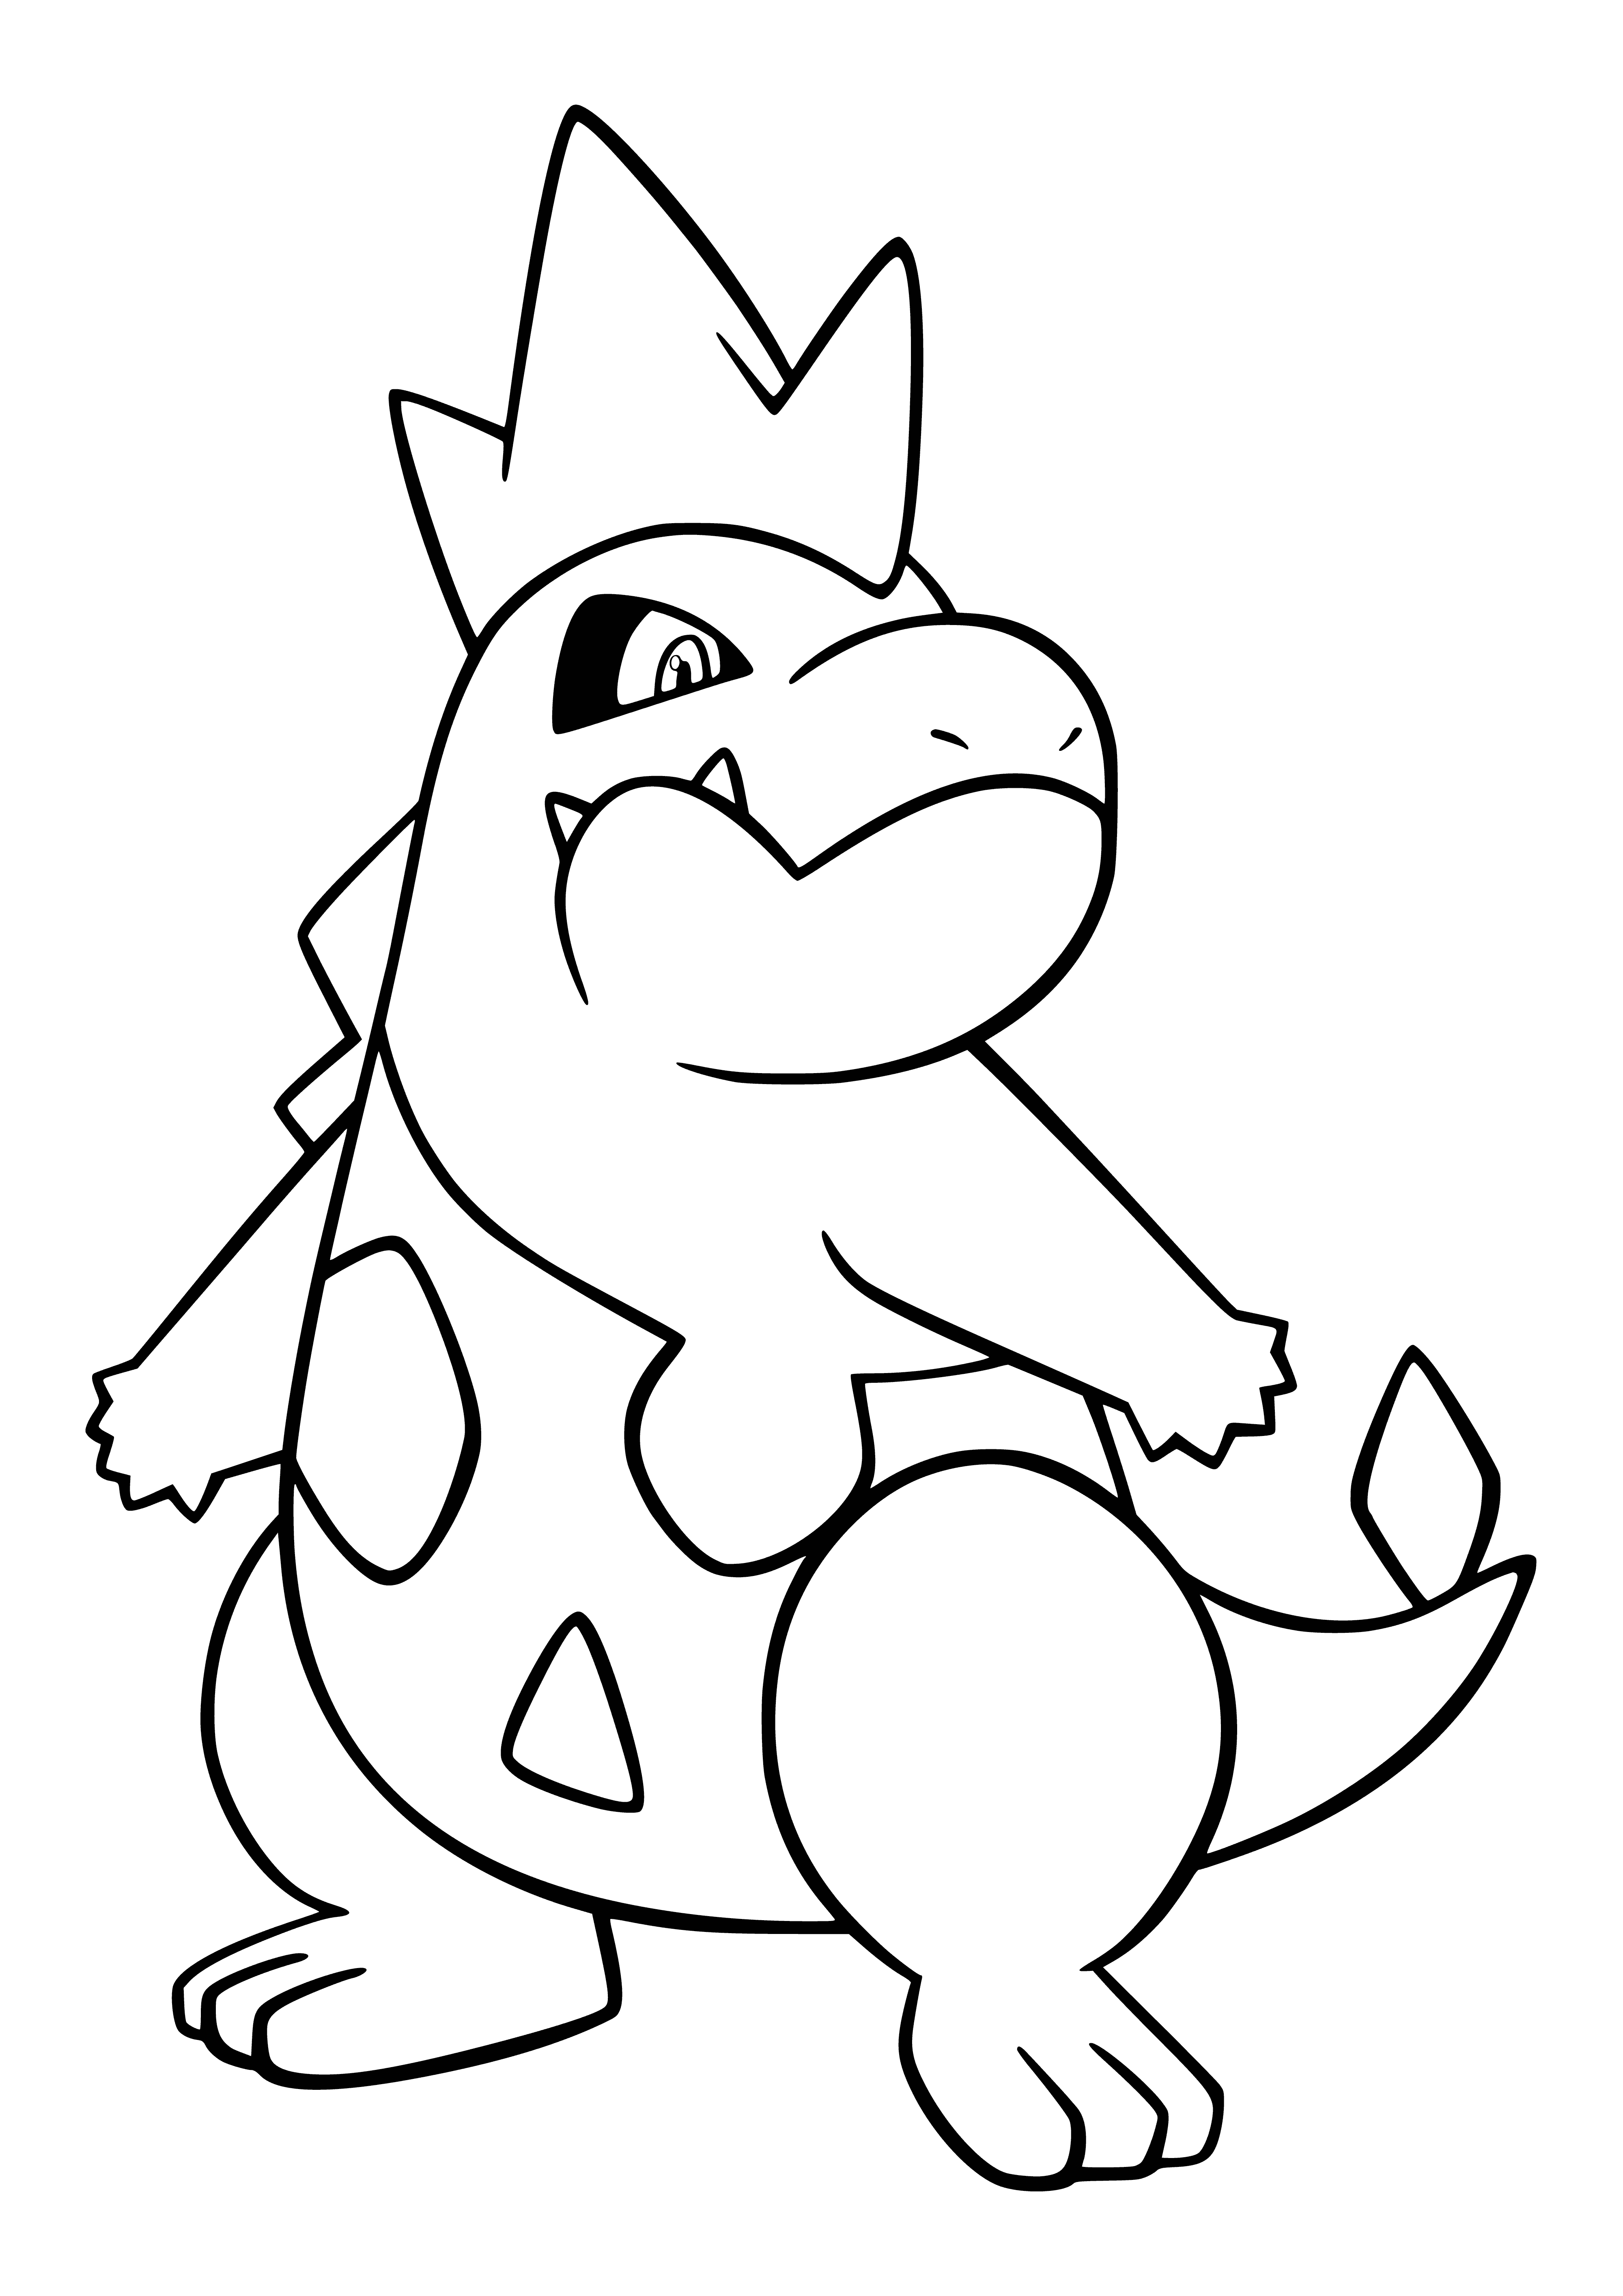 coloring page: Totodile evolves into a blue alligator-like Pokémon with 3 red spikes, white belly, red eyes, large teeth and long tail with a red tip.